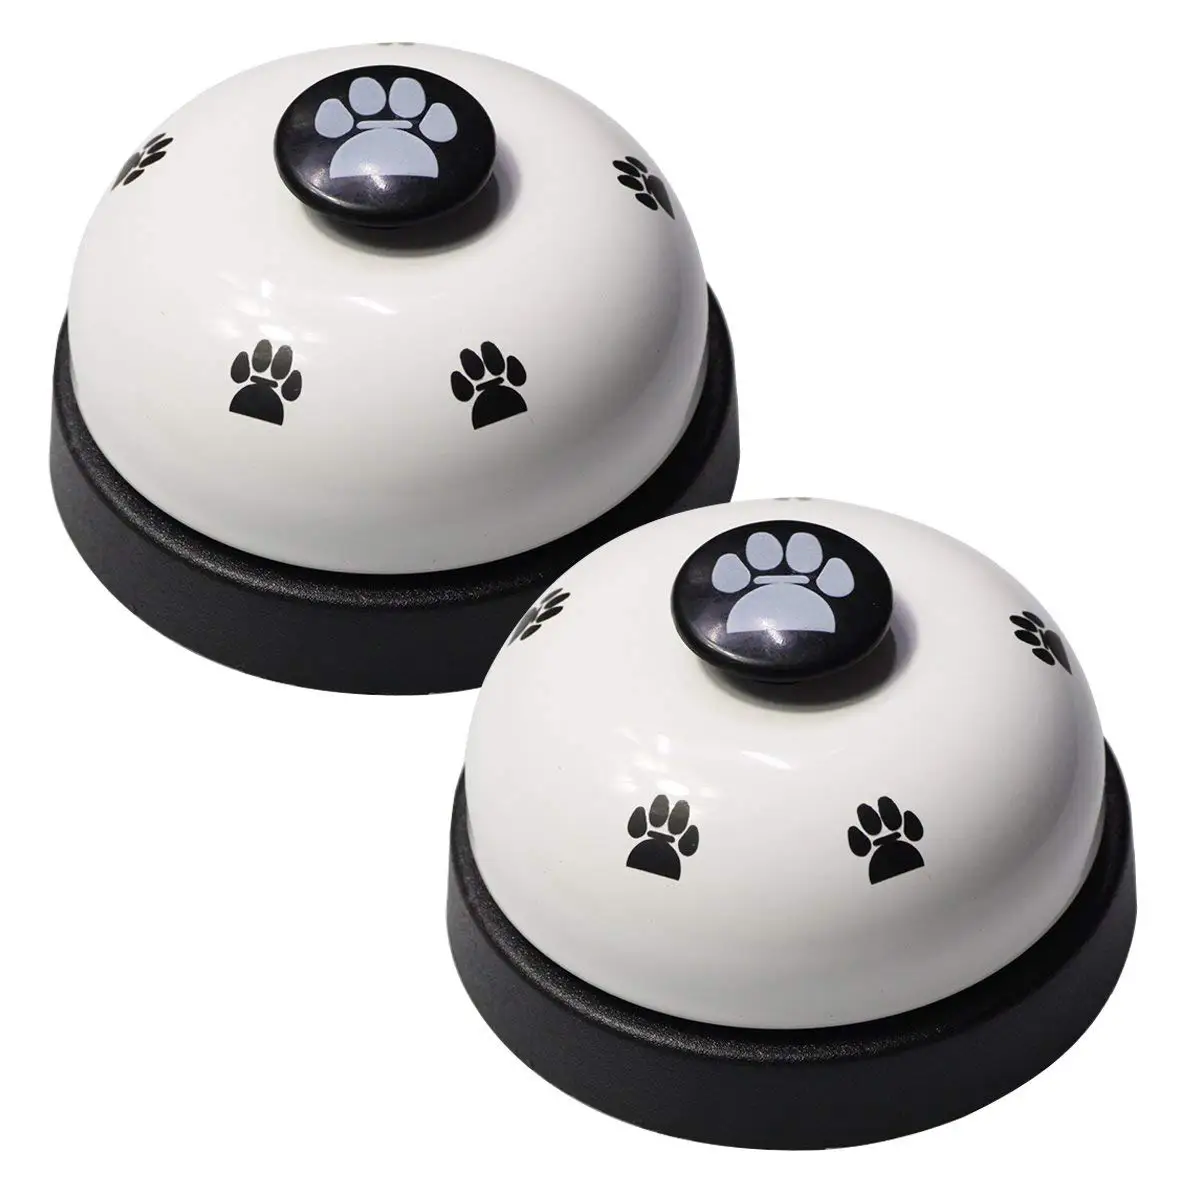 

Pet Dog Training Potty Bells Toy Puppy Cat Educational Toys IQ Interactive Bell for Potty Training and Communication PT011